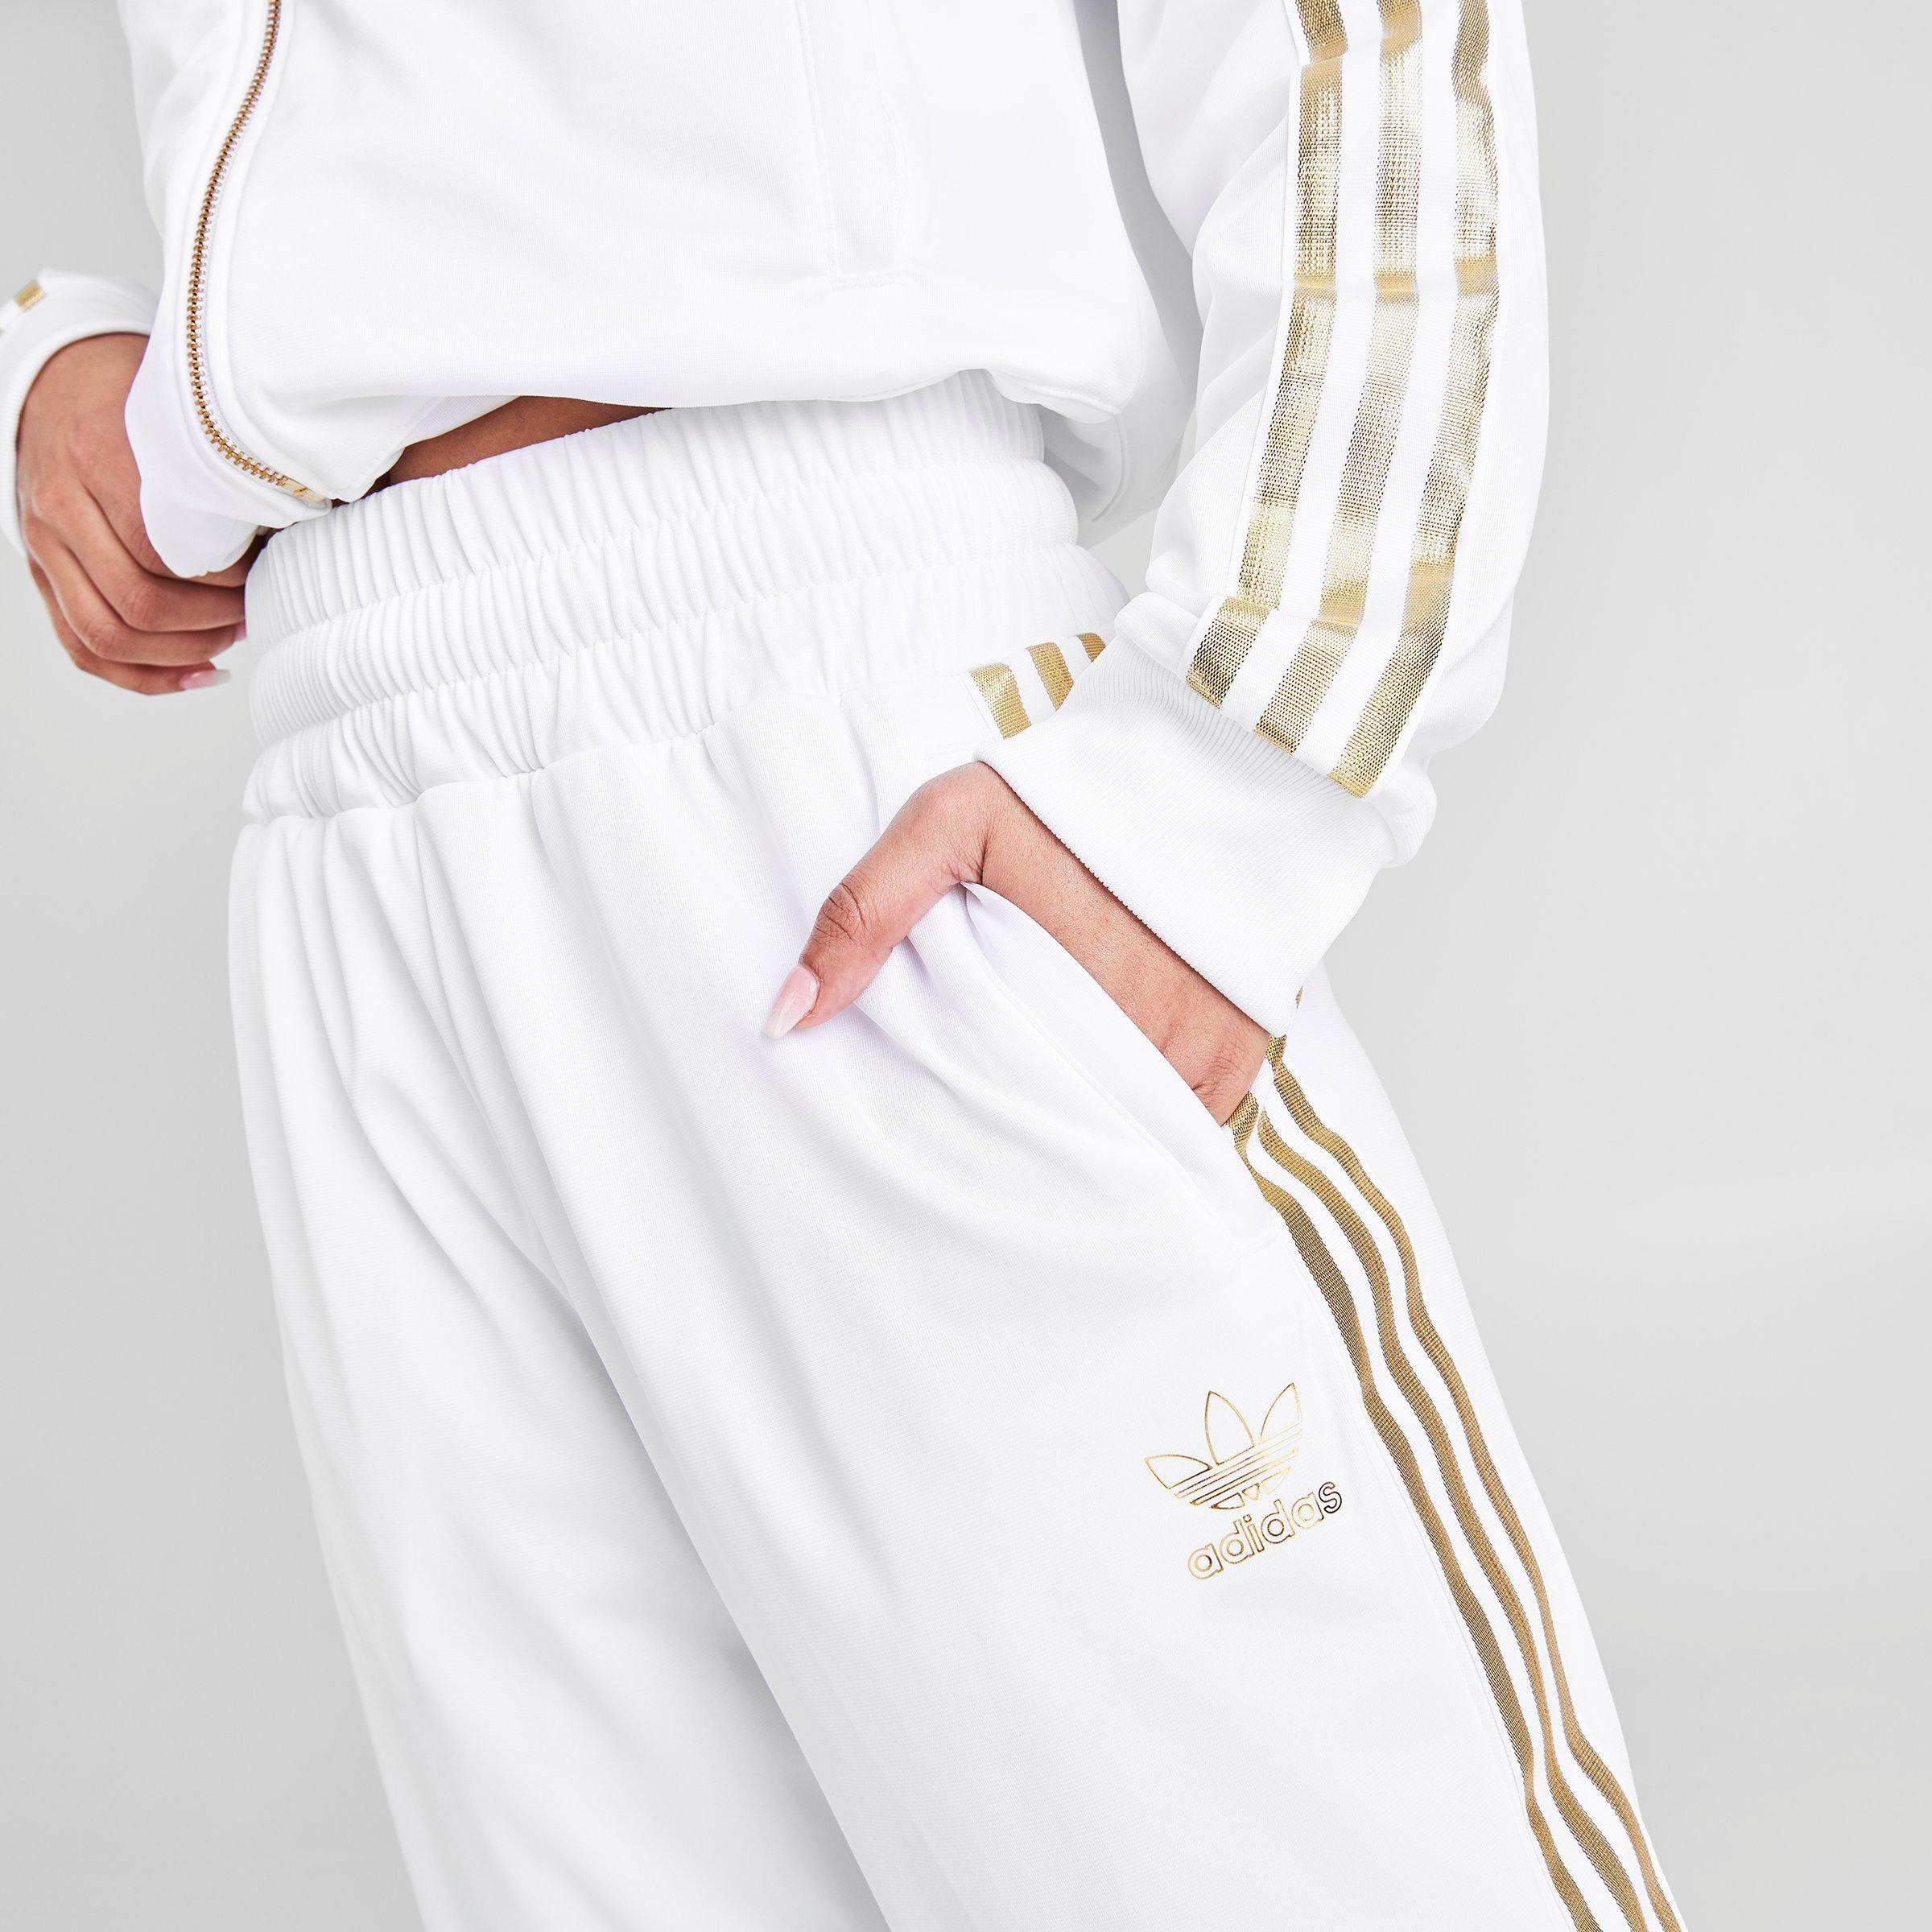 white and gold adidas track pants